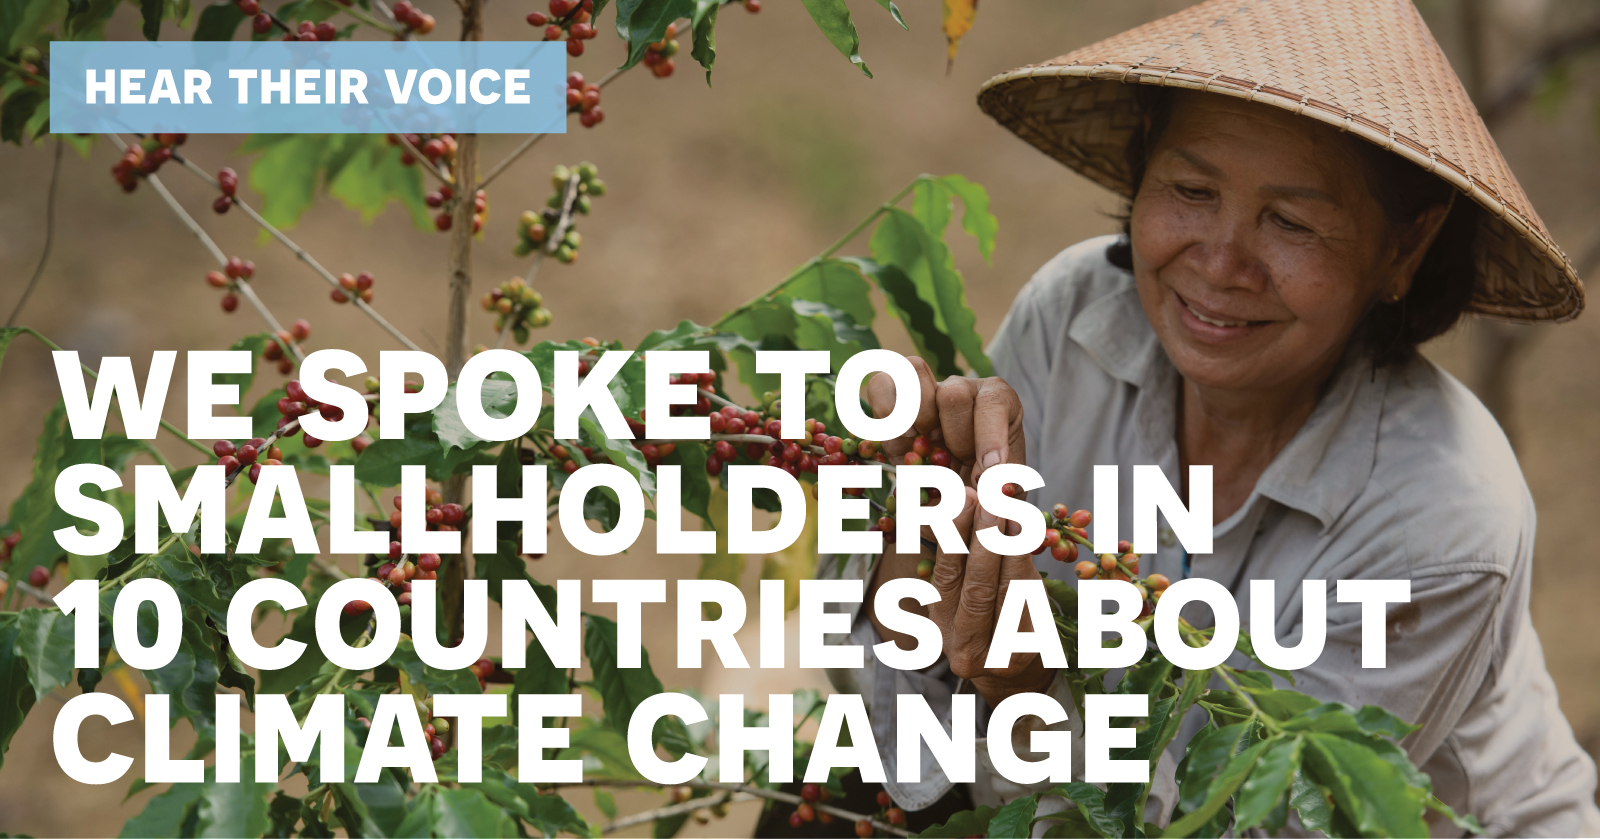 CASH Coalition Press Release: Farmer Voice Report  Highlights Smallholders’ Crucial Role in Advancing Climate Action and Regenerative Agriculture